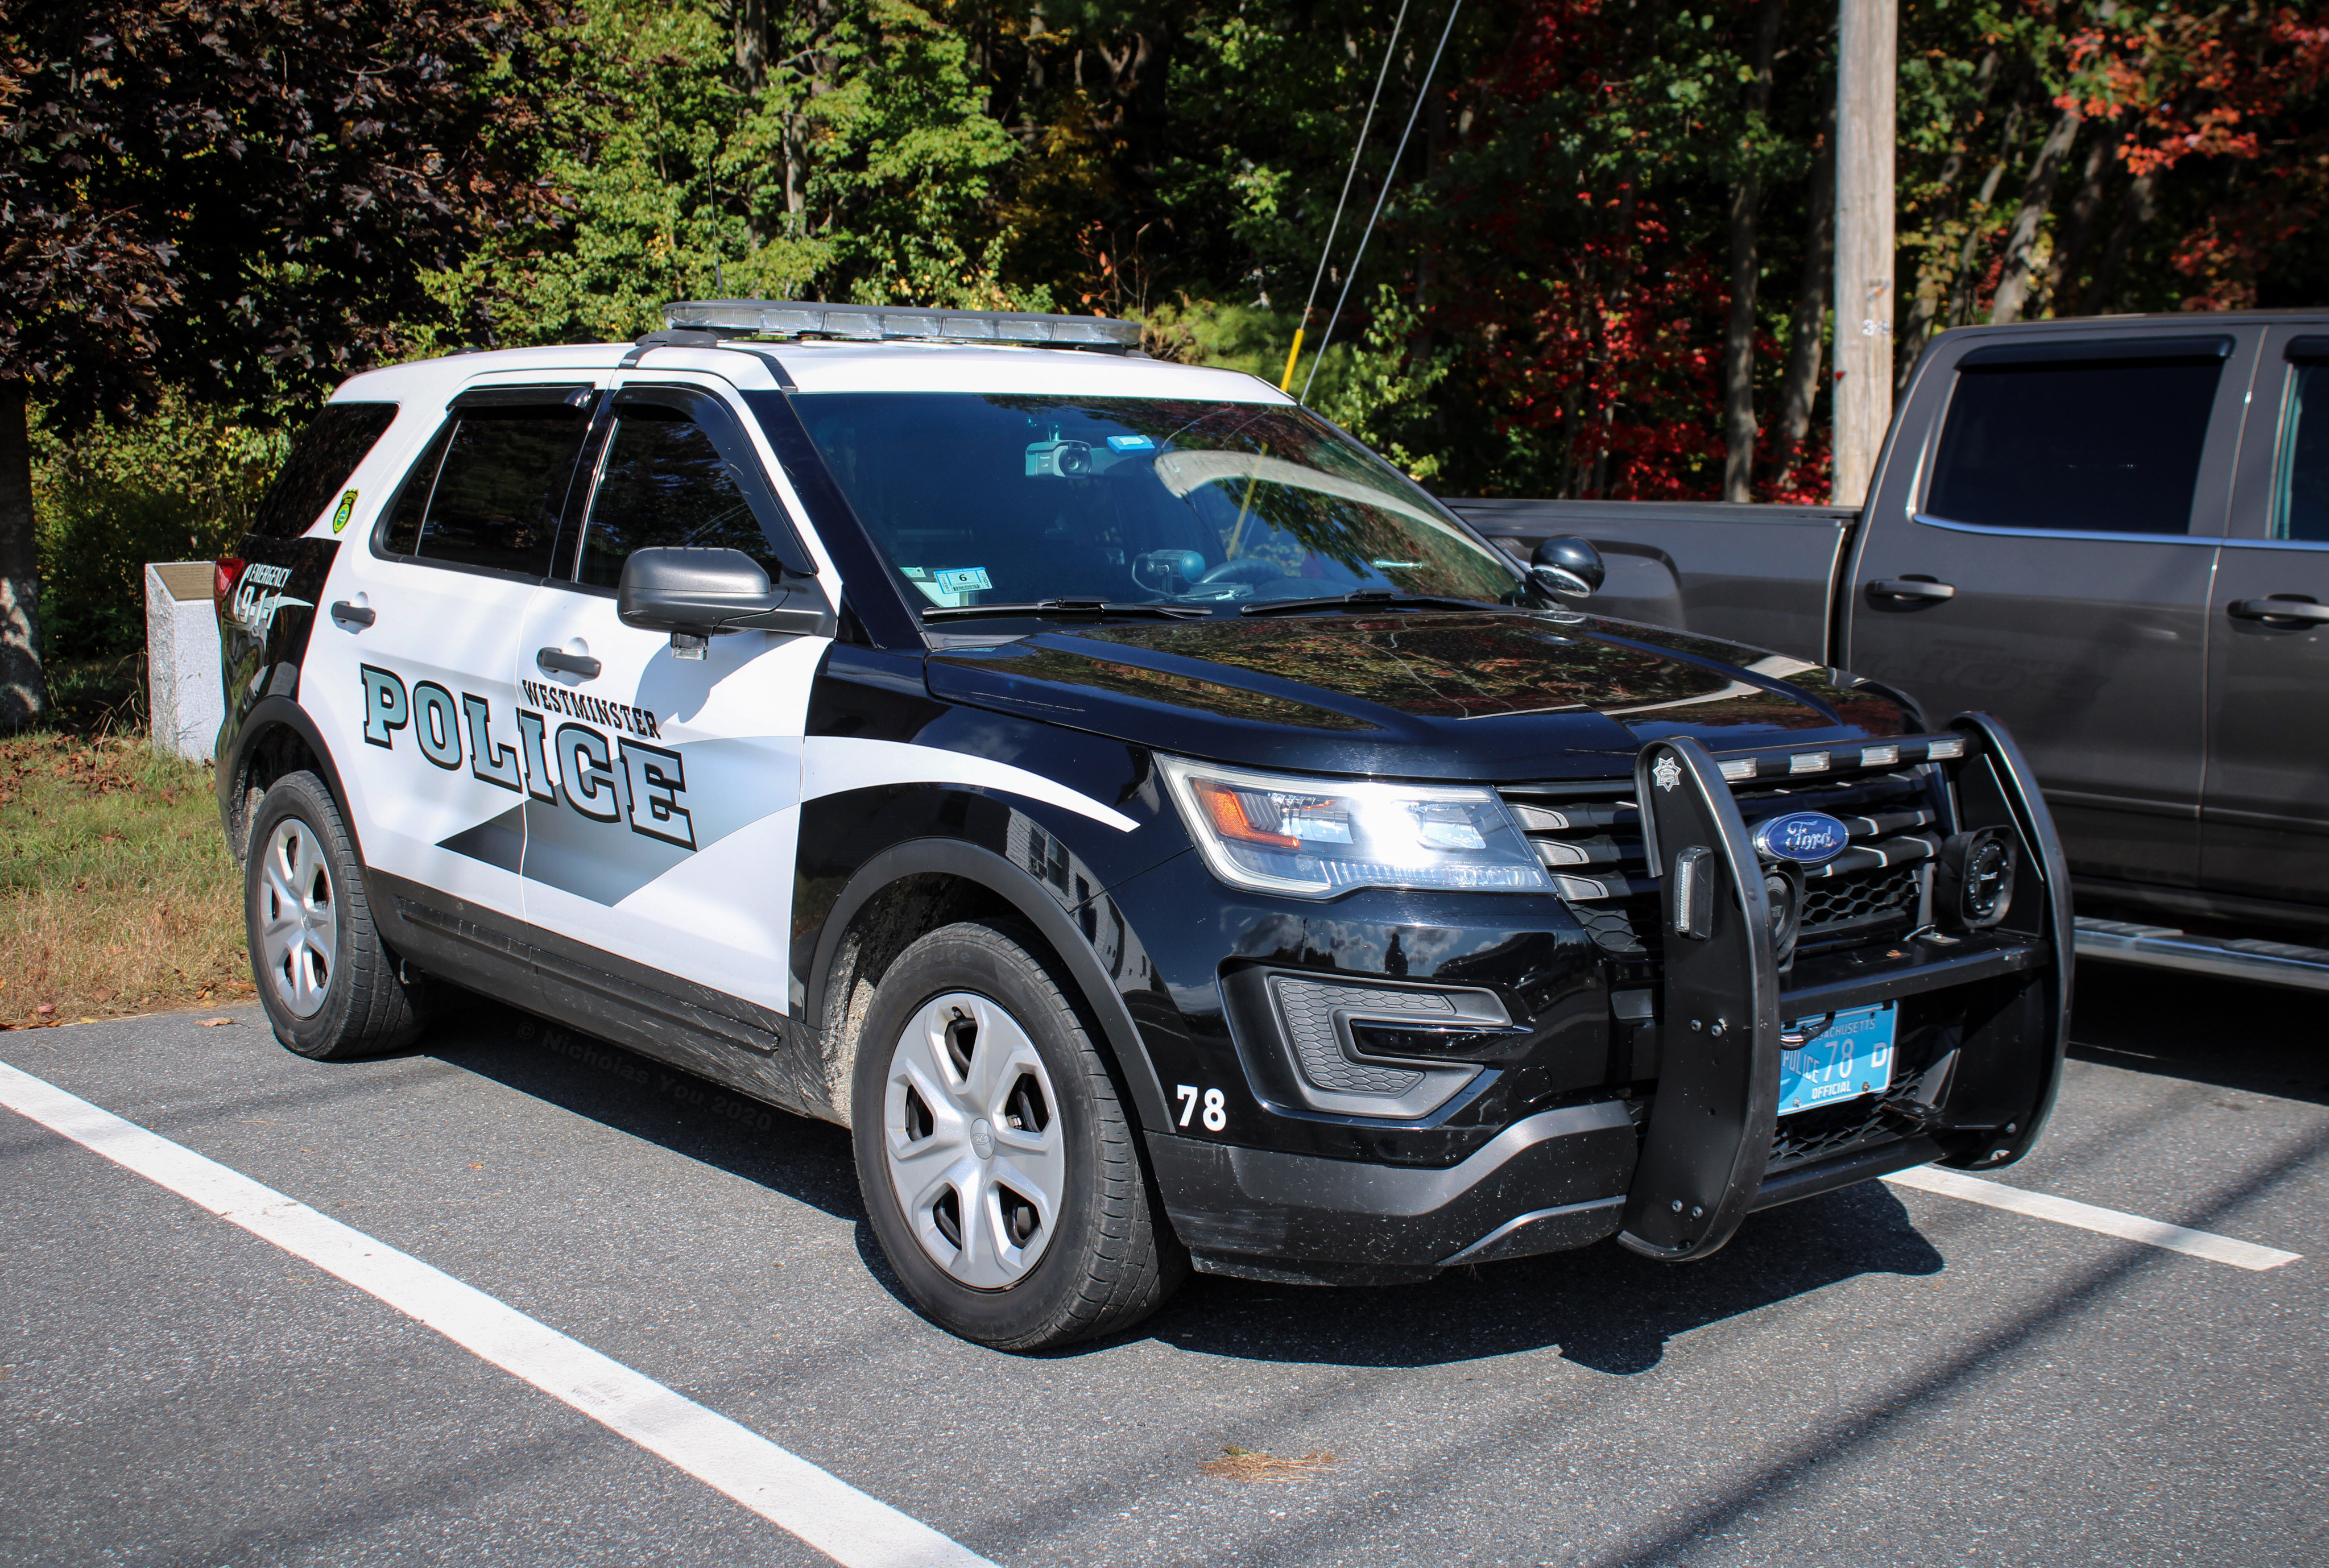 A photo  of Westminster Police
            Cruiser 78, a 2017 Ford Police Interceptor Utility             taken by Nicholas You